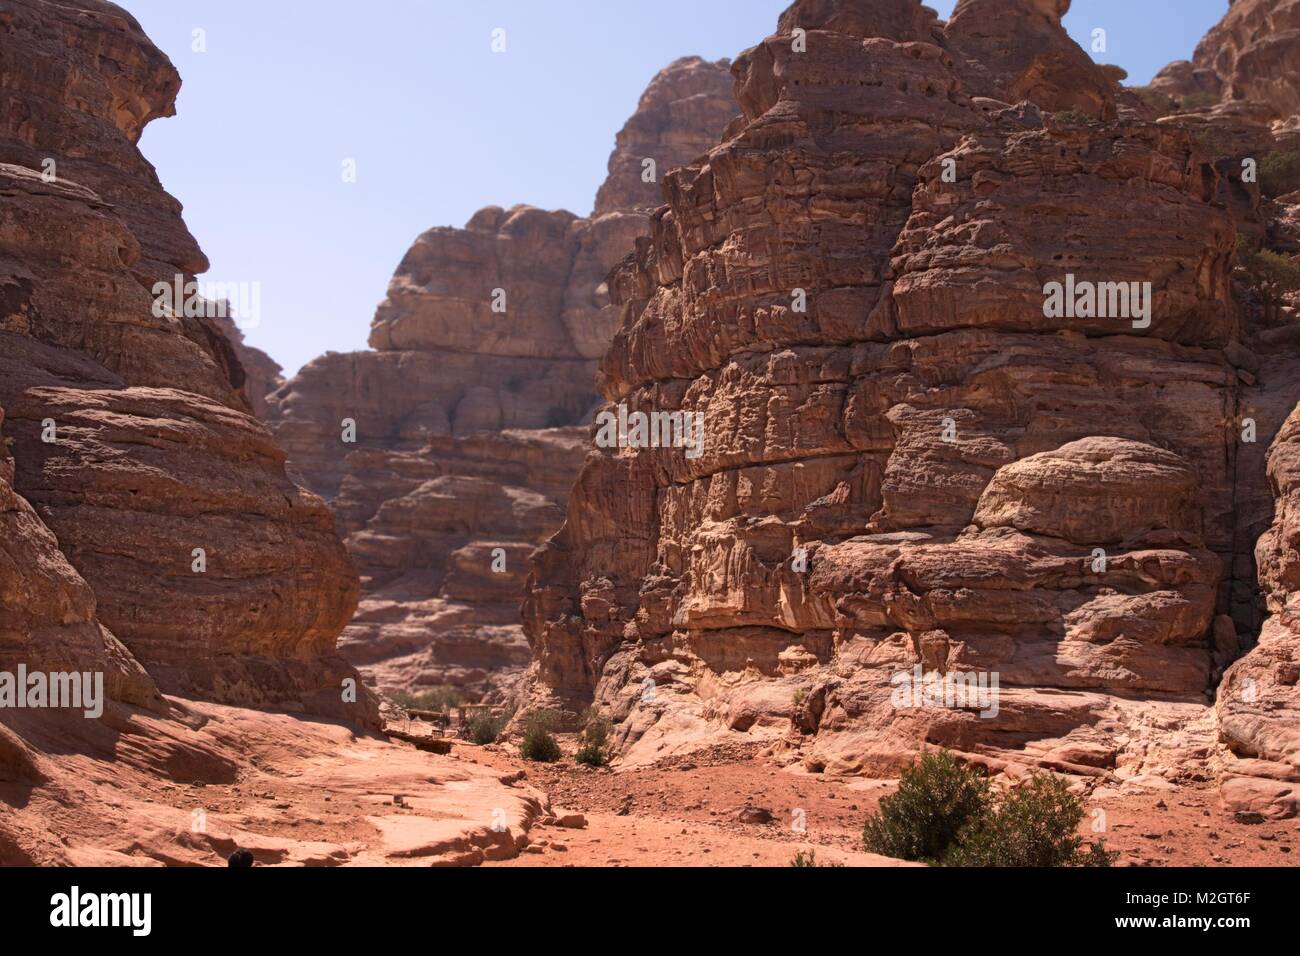 Mars landscape on mountain and valley views of rose city of Petra, Jordan Stock Photo